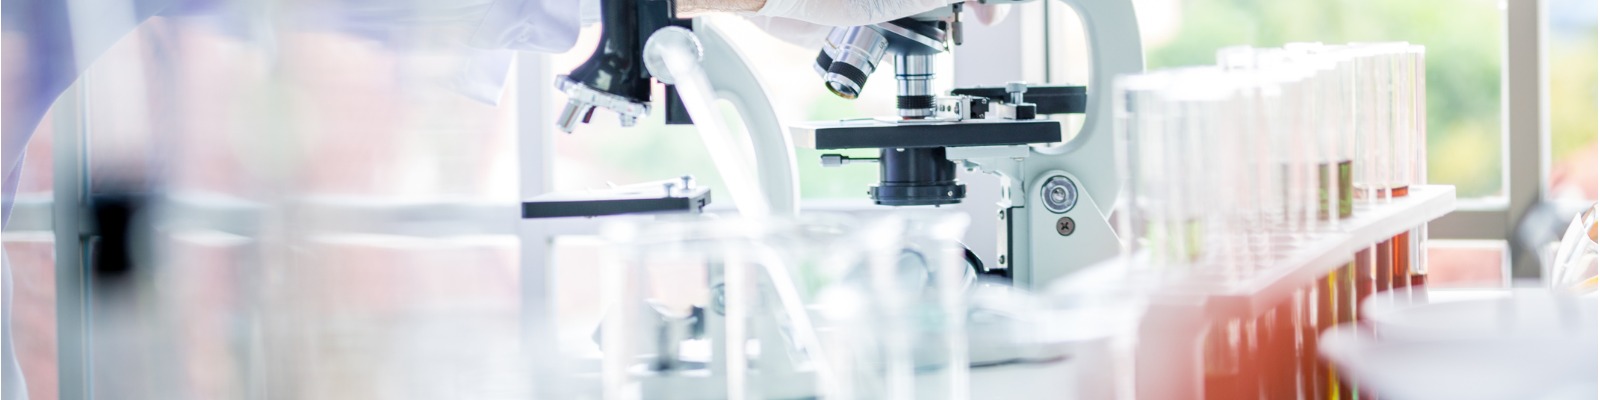 scientists-man-working-and-look-in-to-microscope-in-lab-picture-1600x400